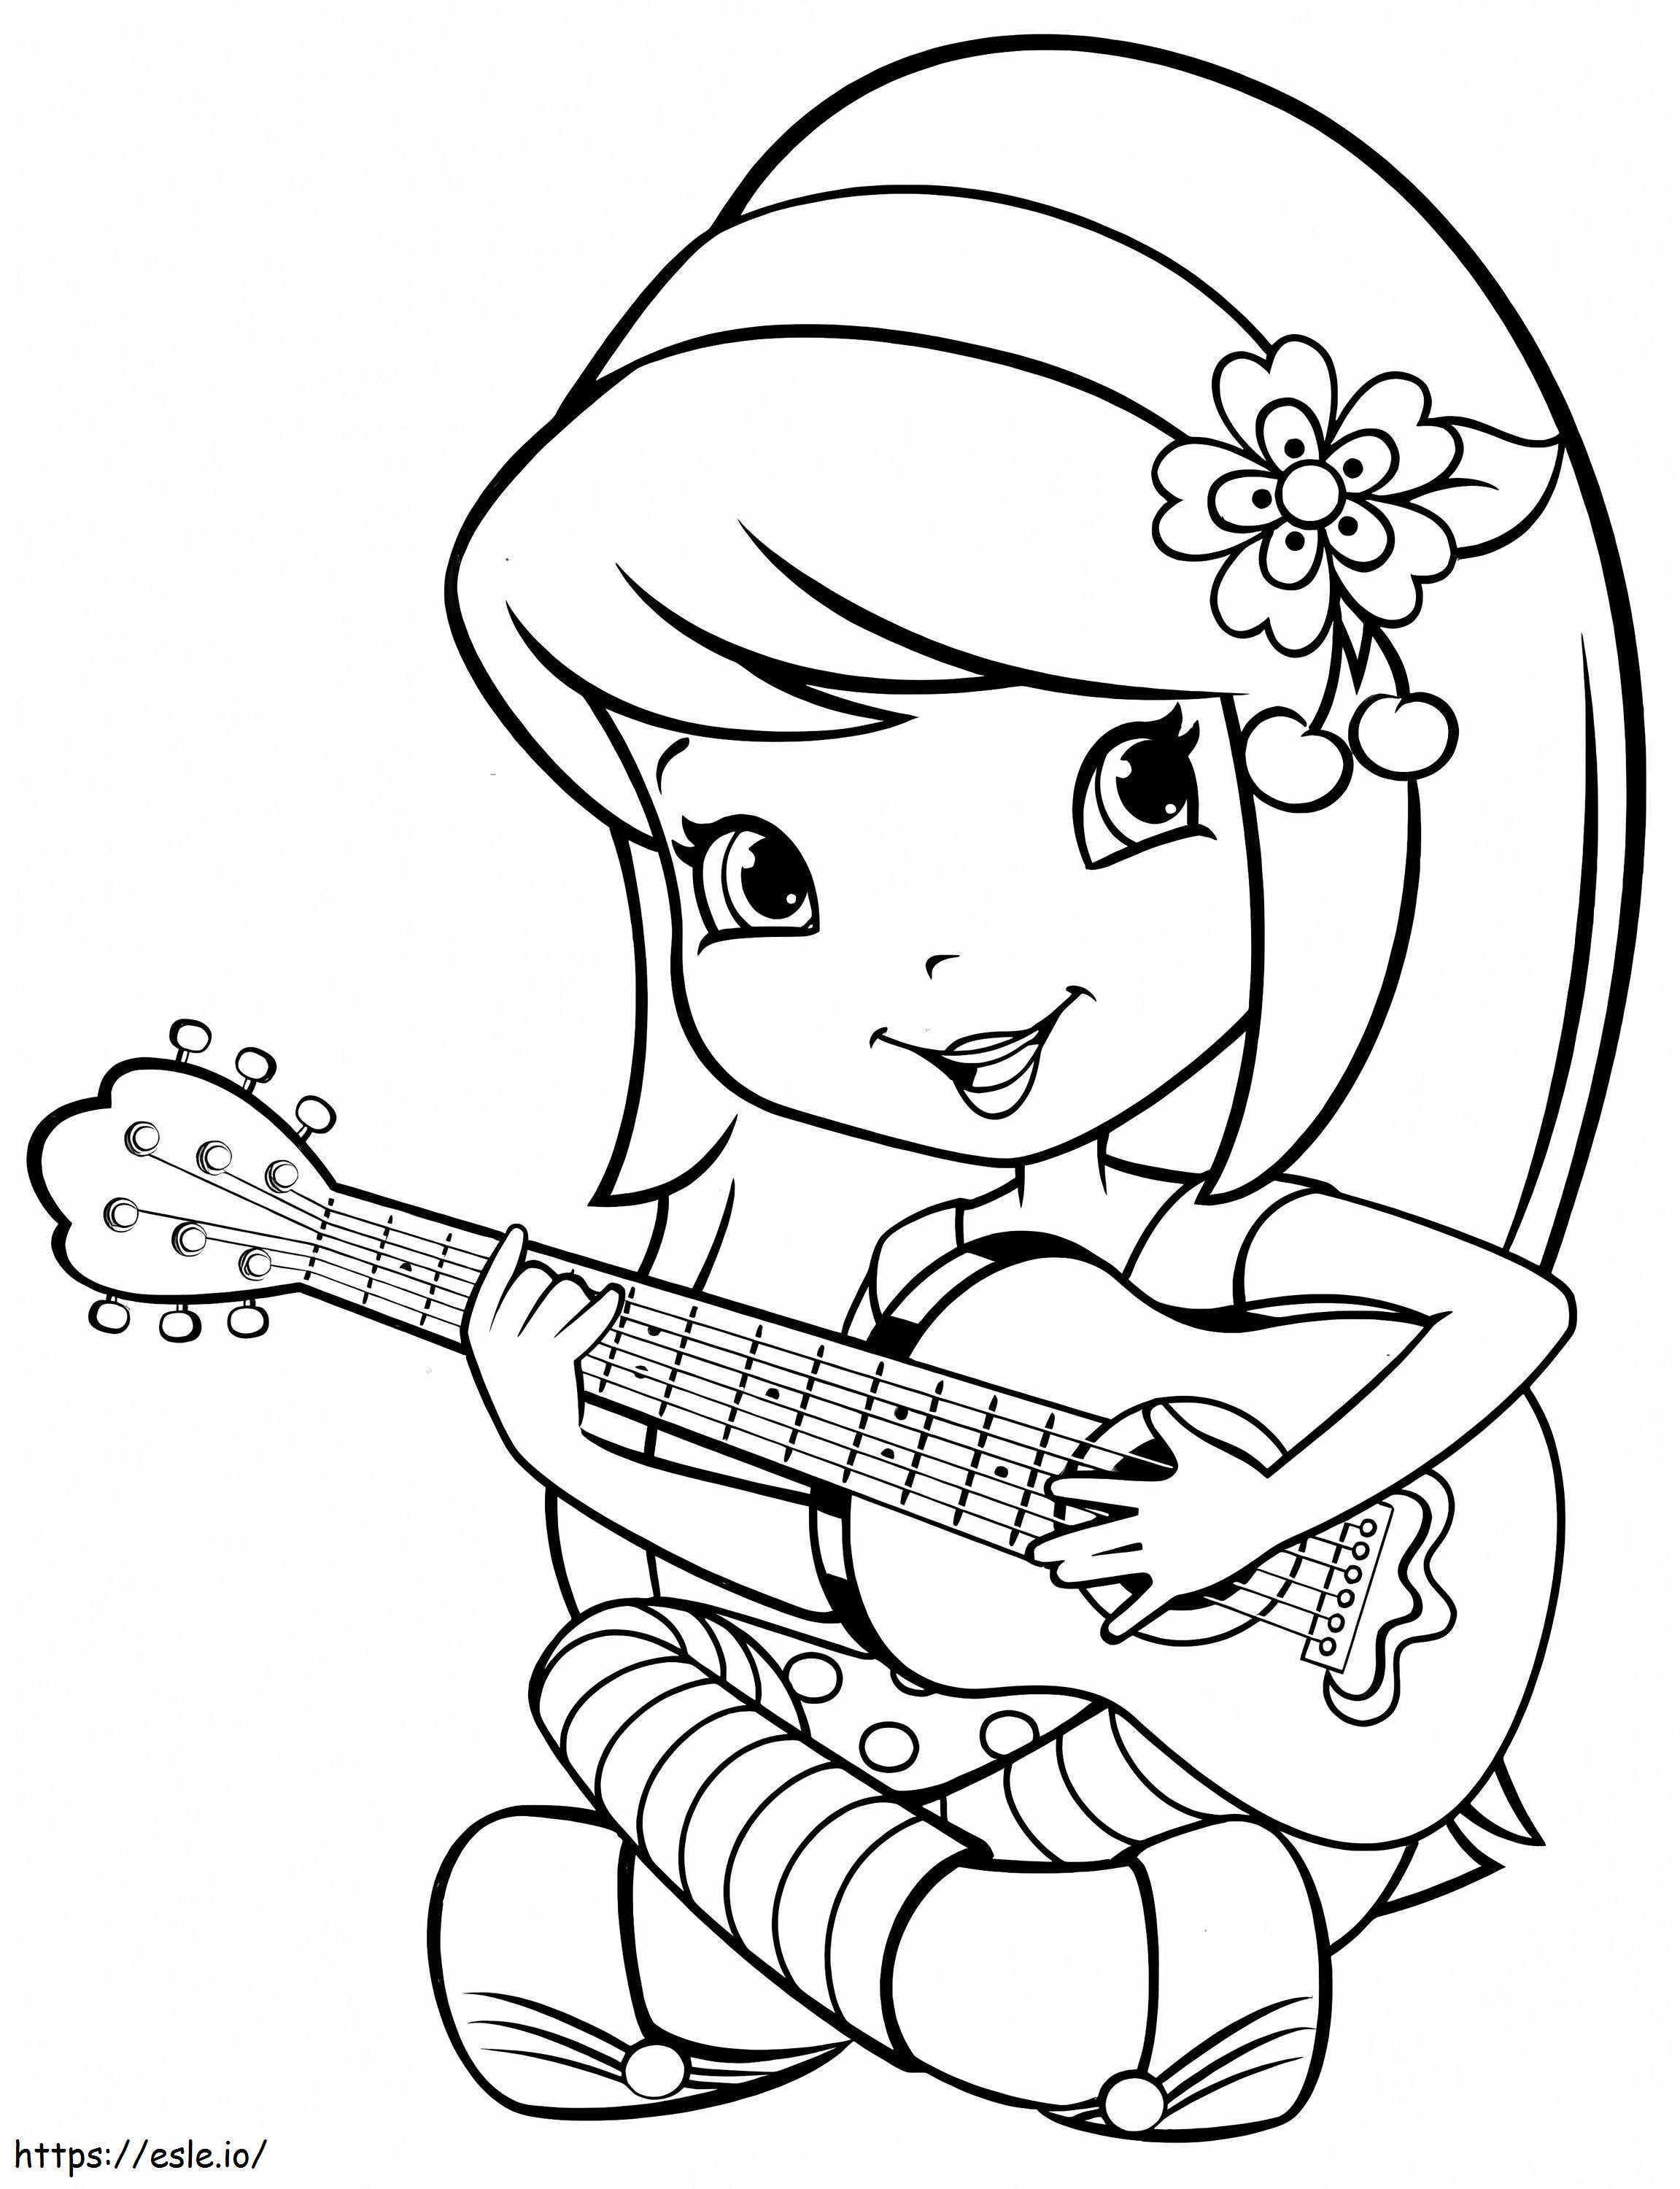 Cherry Jam coloring page